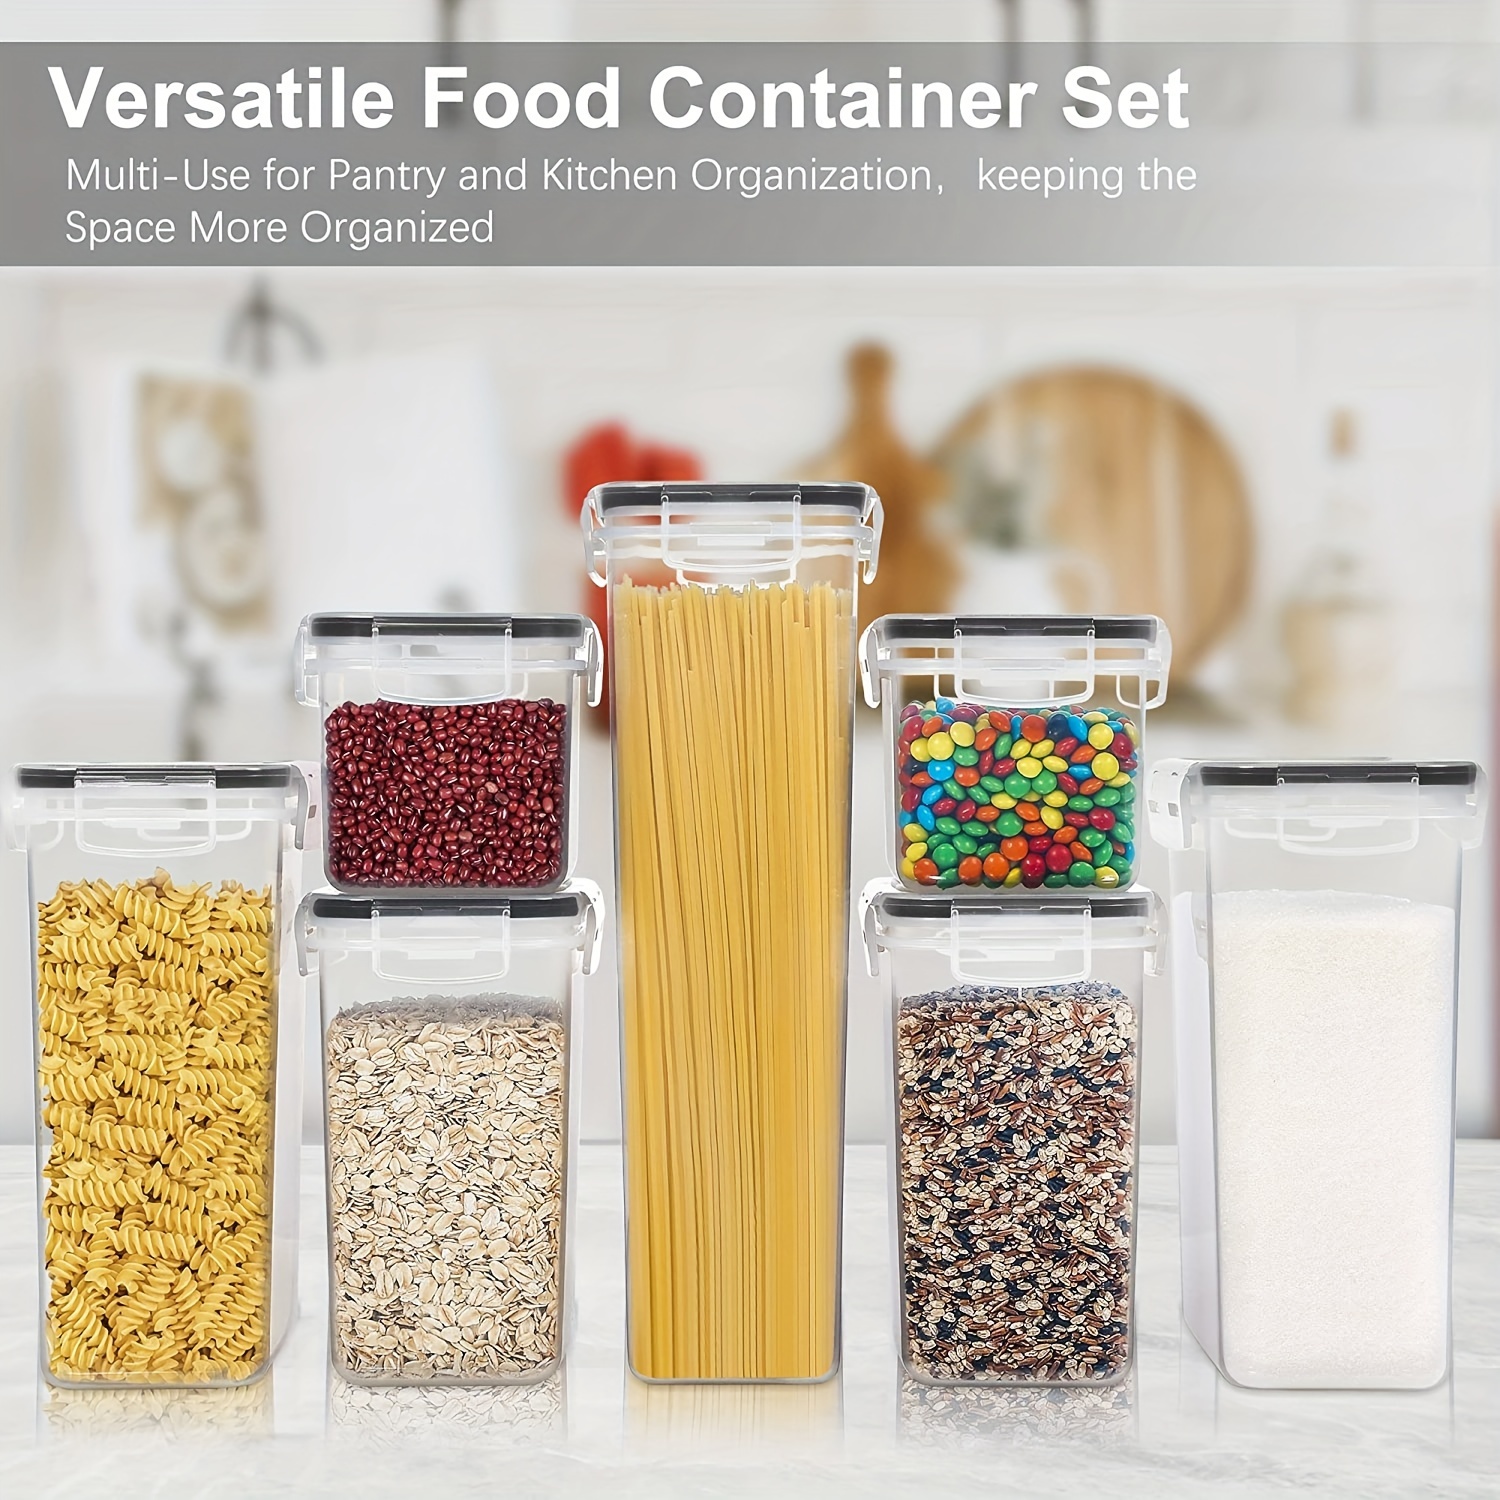 Vtopmart Airtight Food Storage Containers Set with Lids, 15pcs BPA Free Plastic Dry Food Canisters for Kitchen Pantry Organization and Storage